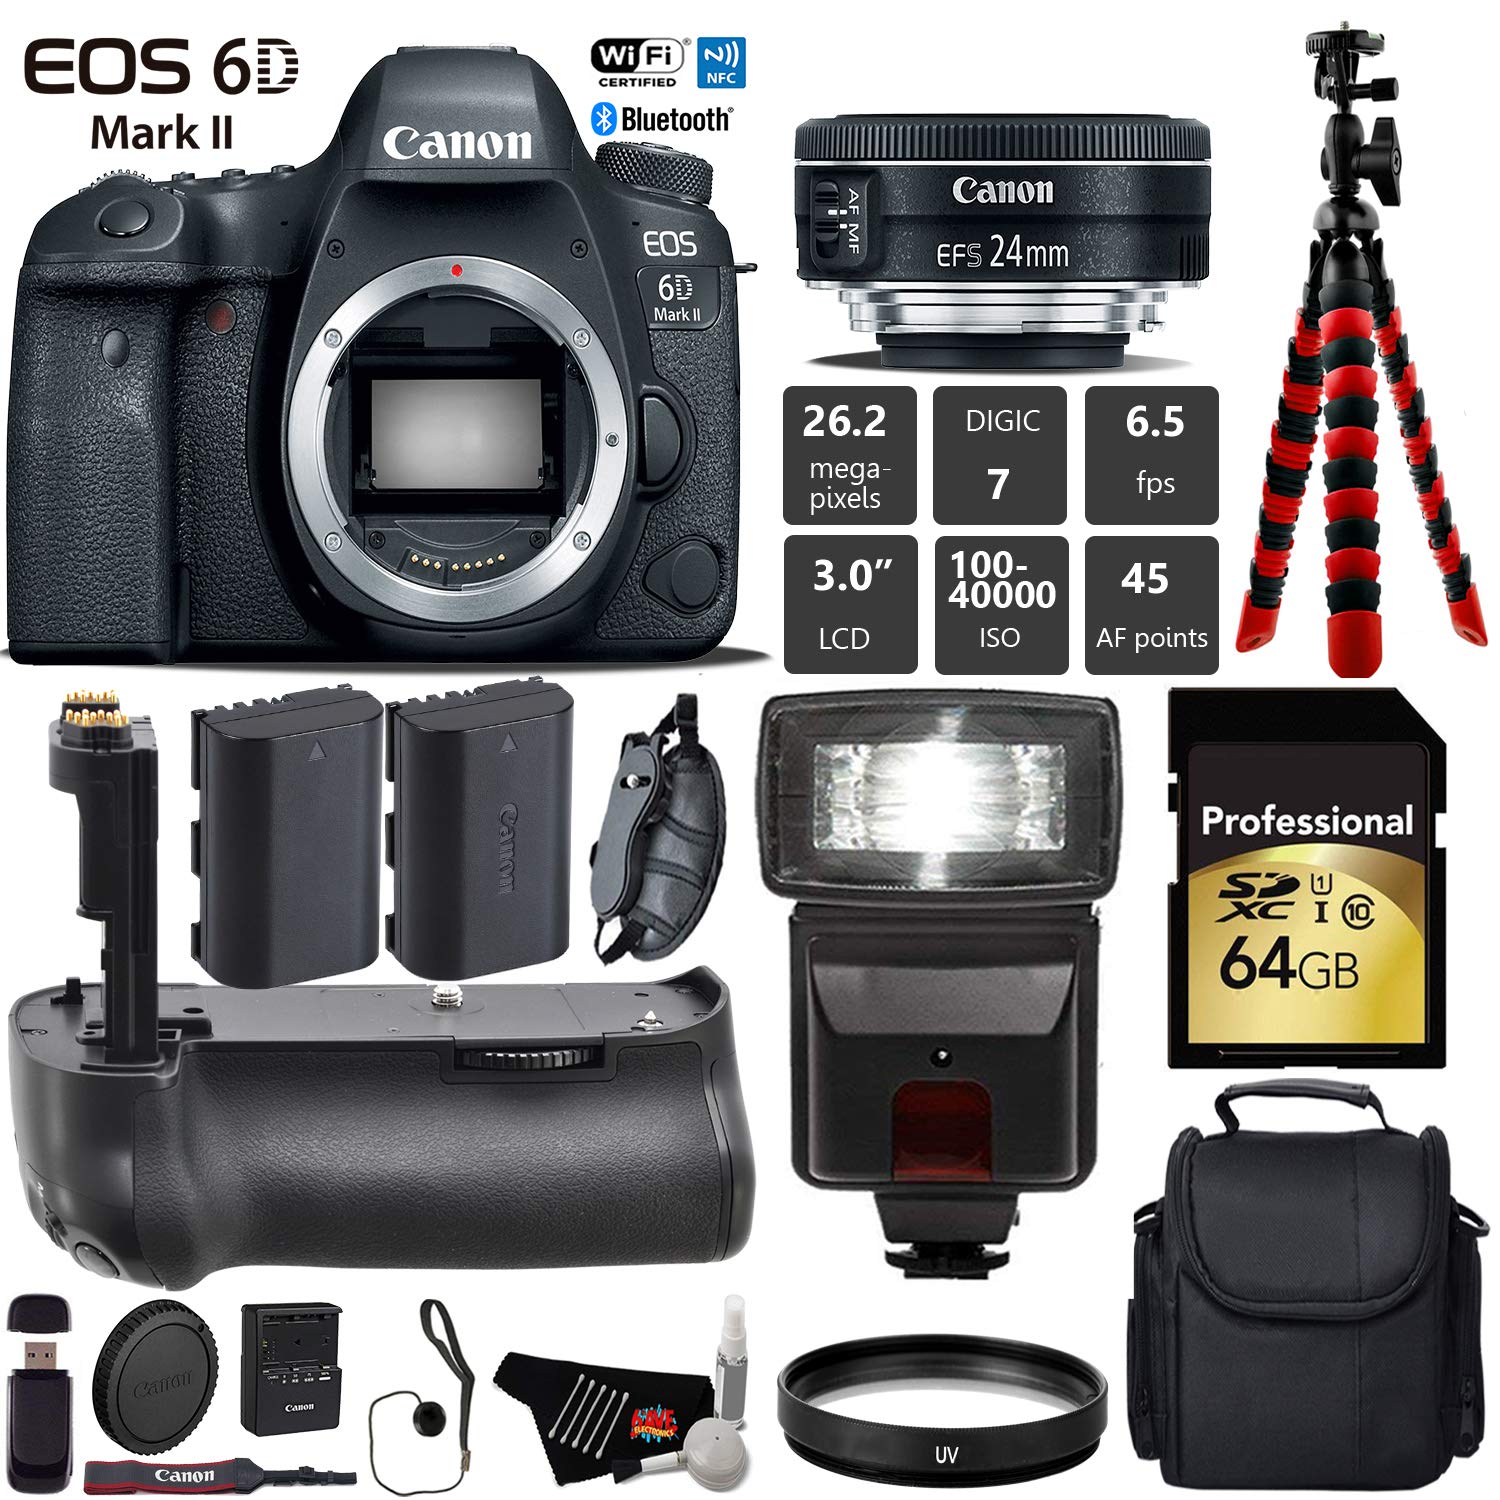 Canon EOS 6D Mark II DSLR Camera With 24mm f/2.8 STM Lens + Professional Battery Grip + UV Protection Filter + Flash Pro Bundle